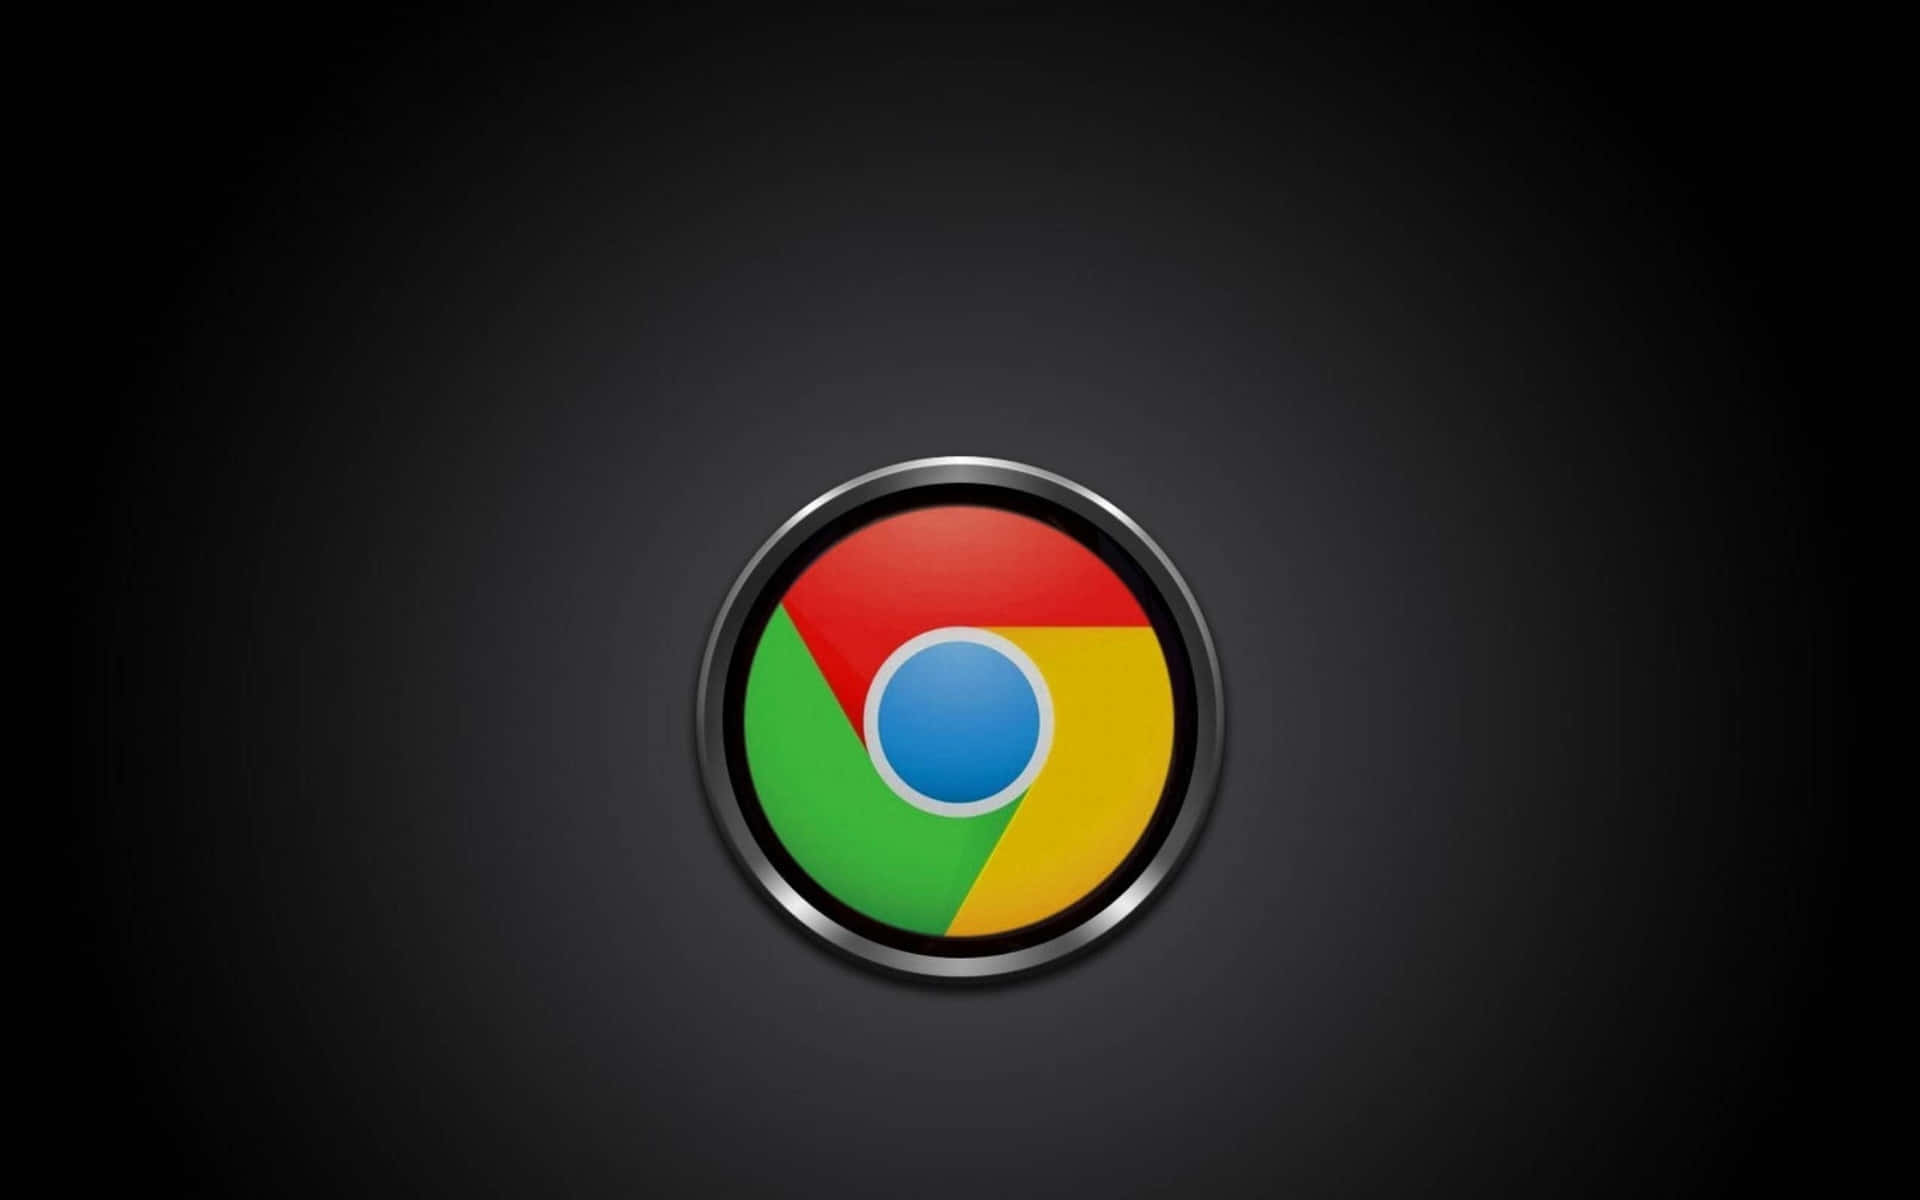 Now Browse Faster and More Securely with Google Chrome